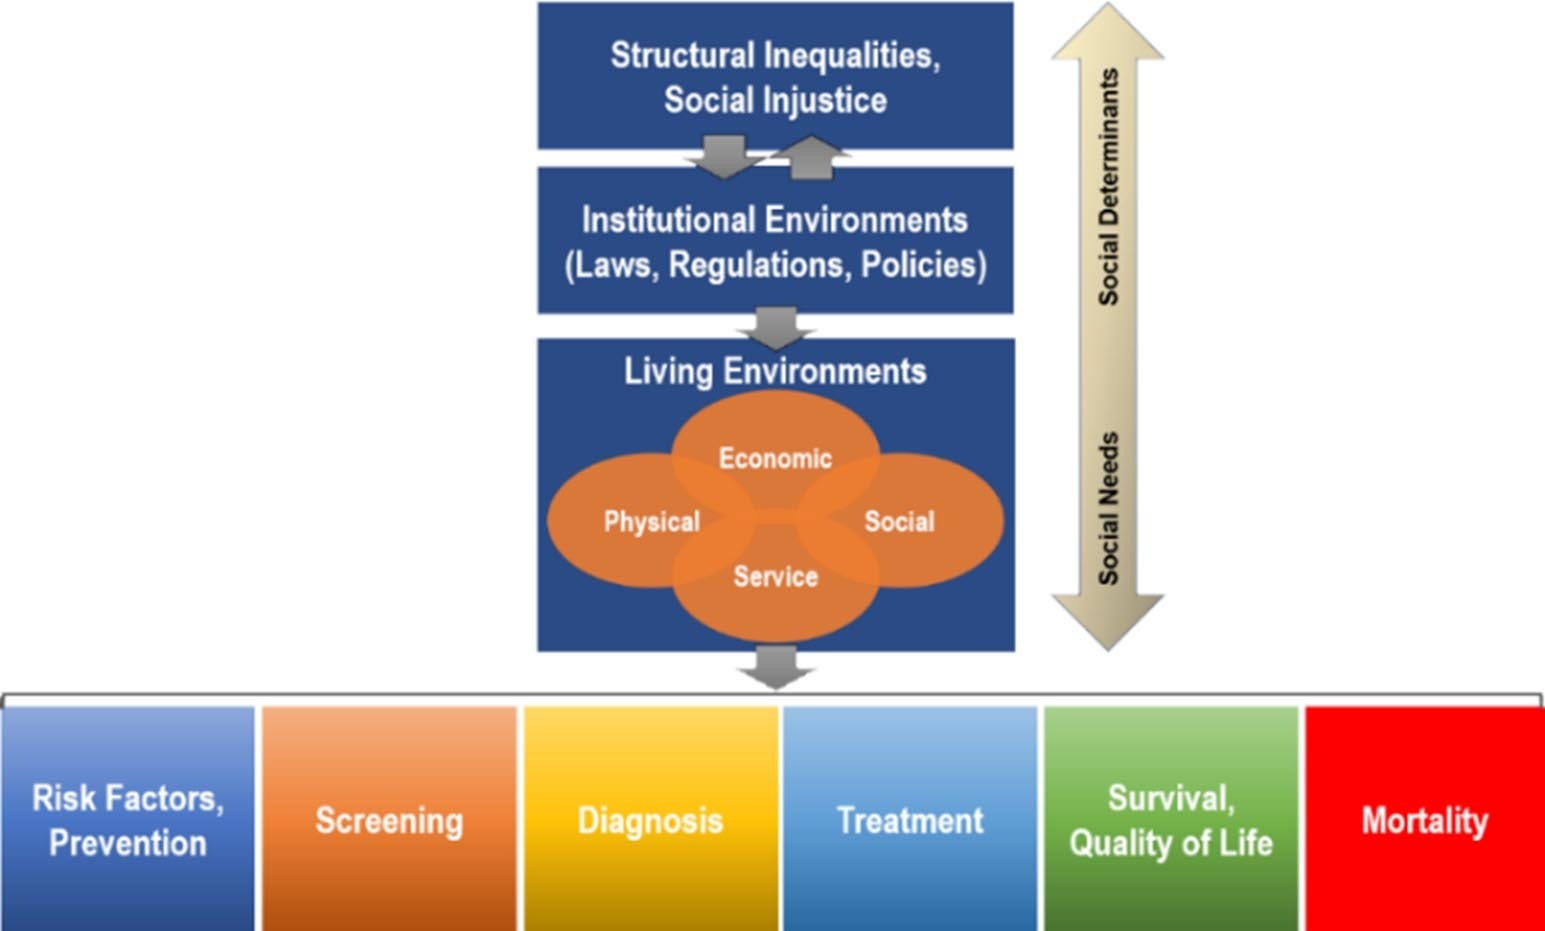 Structural Inequality and Social Justice are social determinants that affect institutional environments